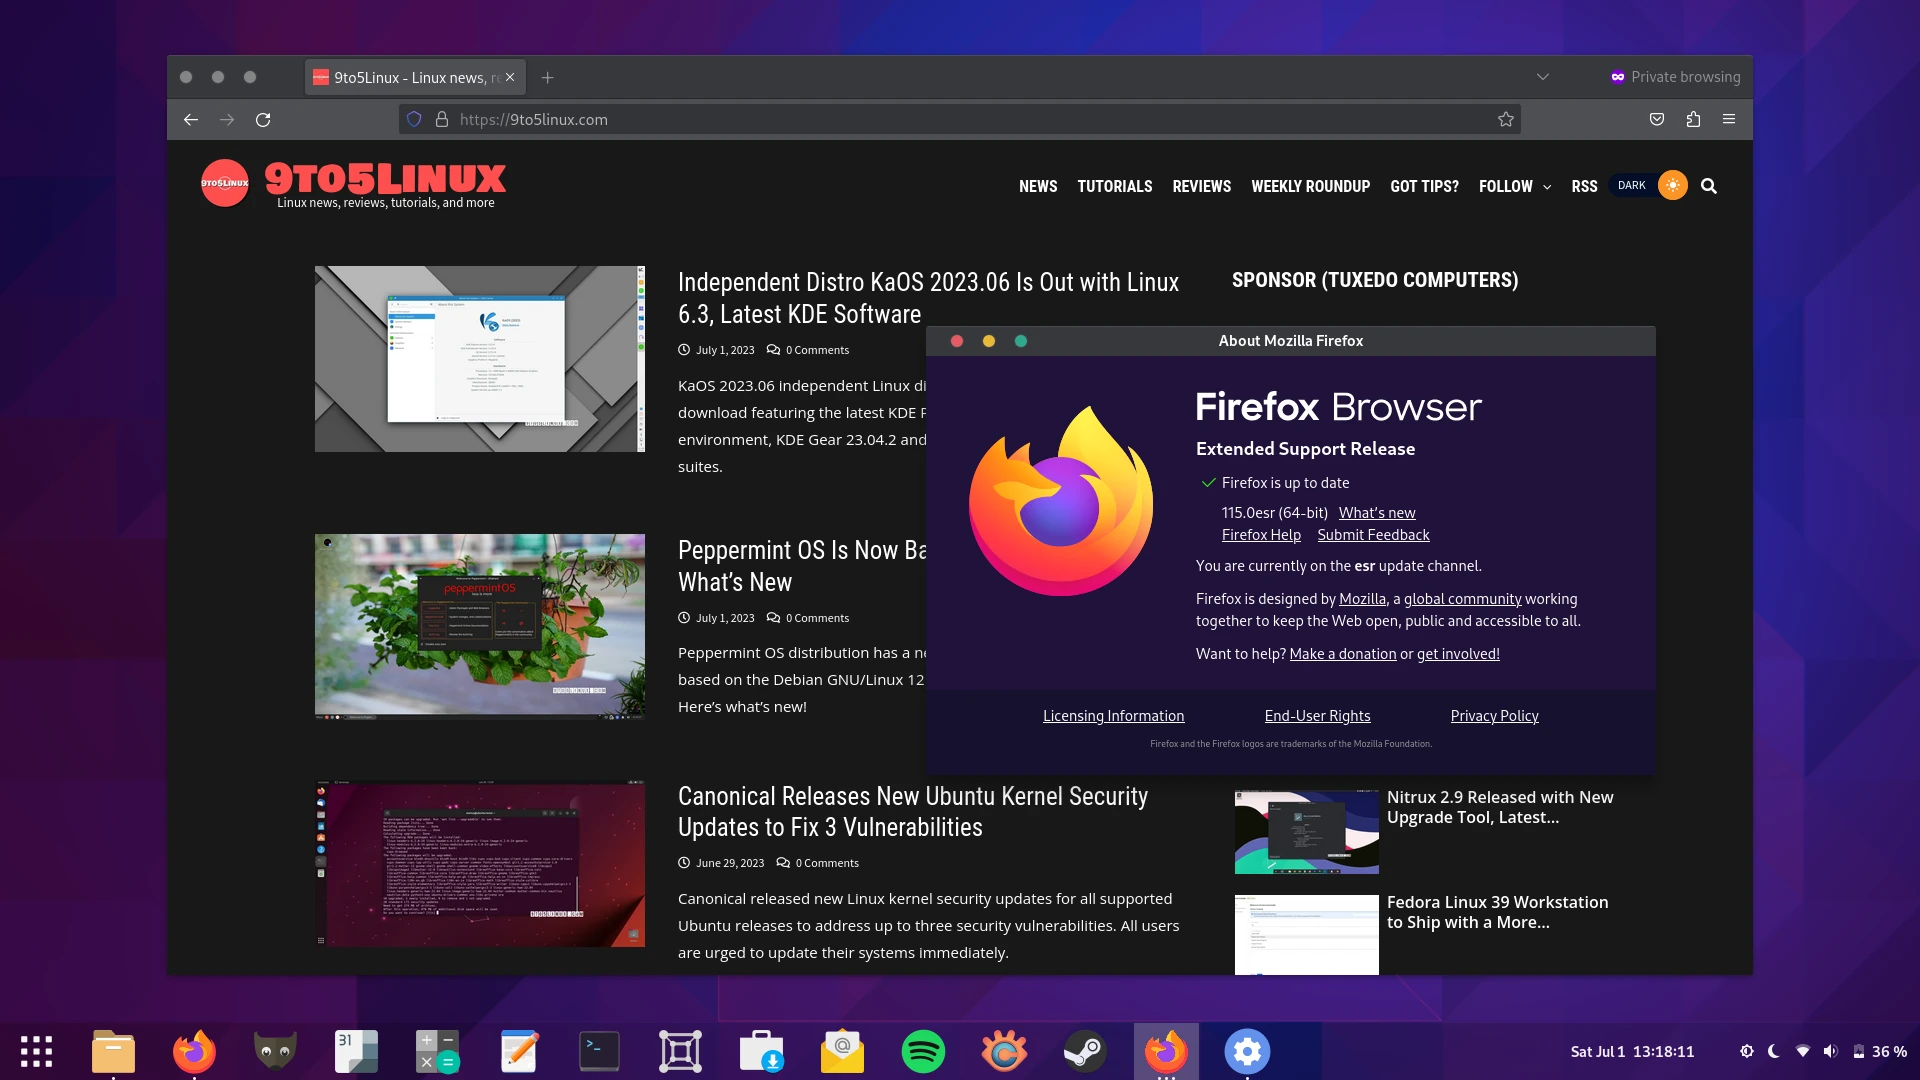 Firefox 115 ESR Is Here with Hardware Video Decoding for Intel GPUs on Linux